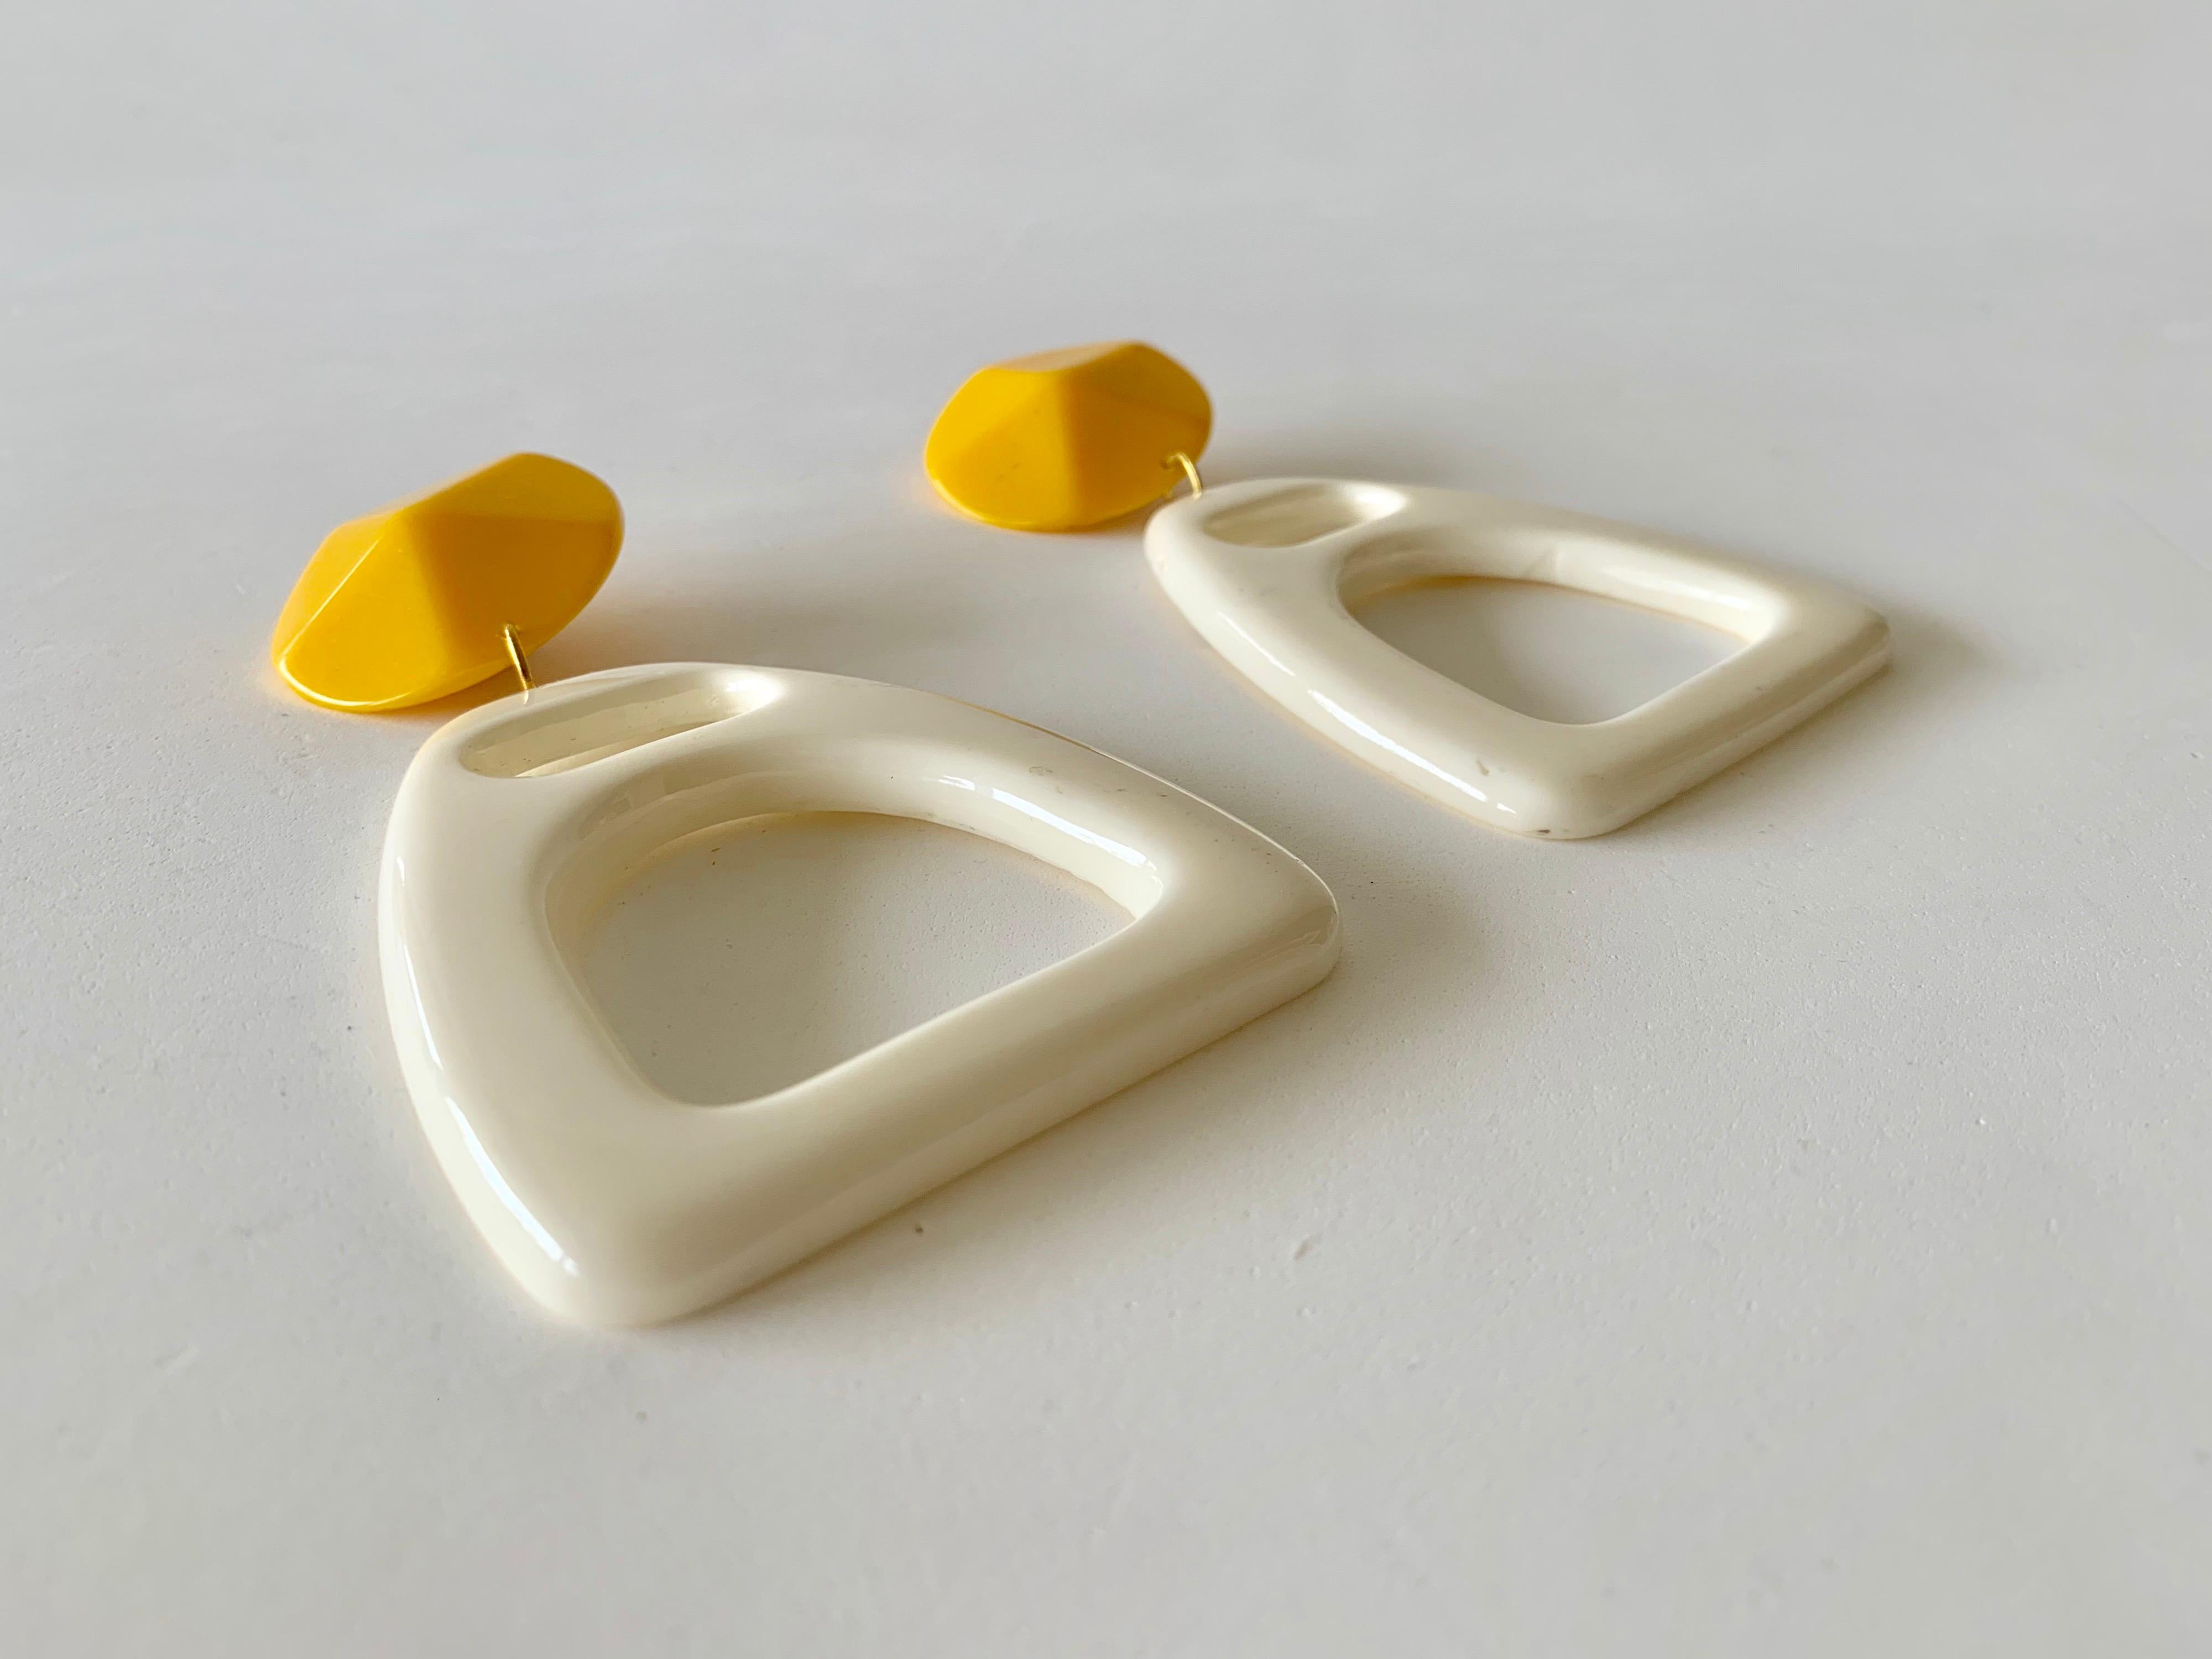 Vintage Mod Oversized Yellow and White Statement Earrings  5